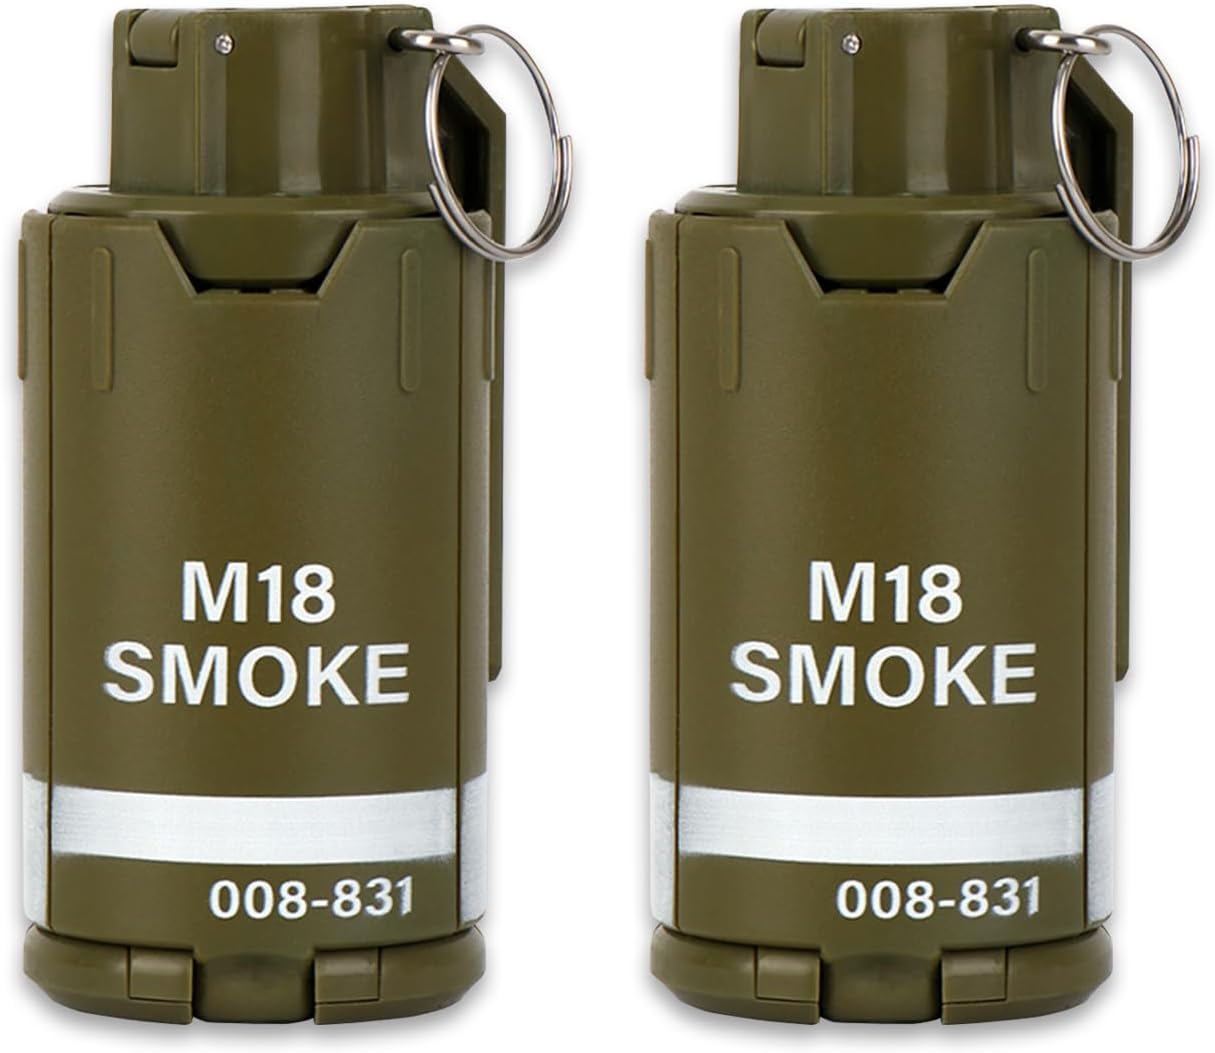 Two smoke grenades with key chains, ready for deployment.